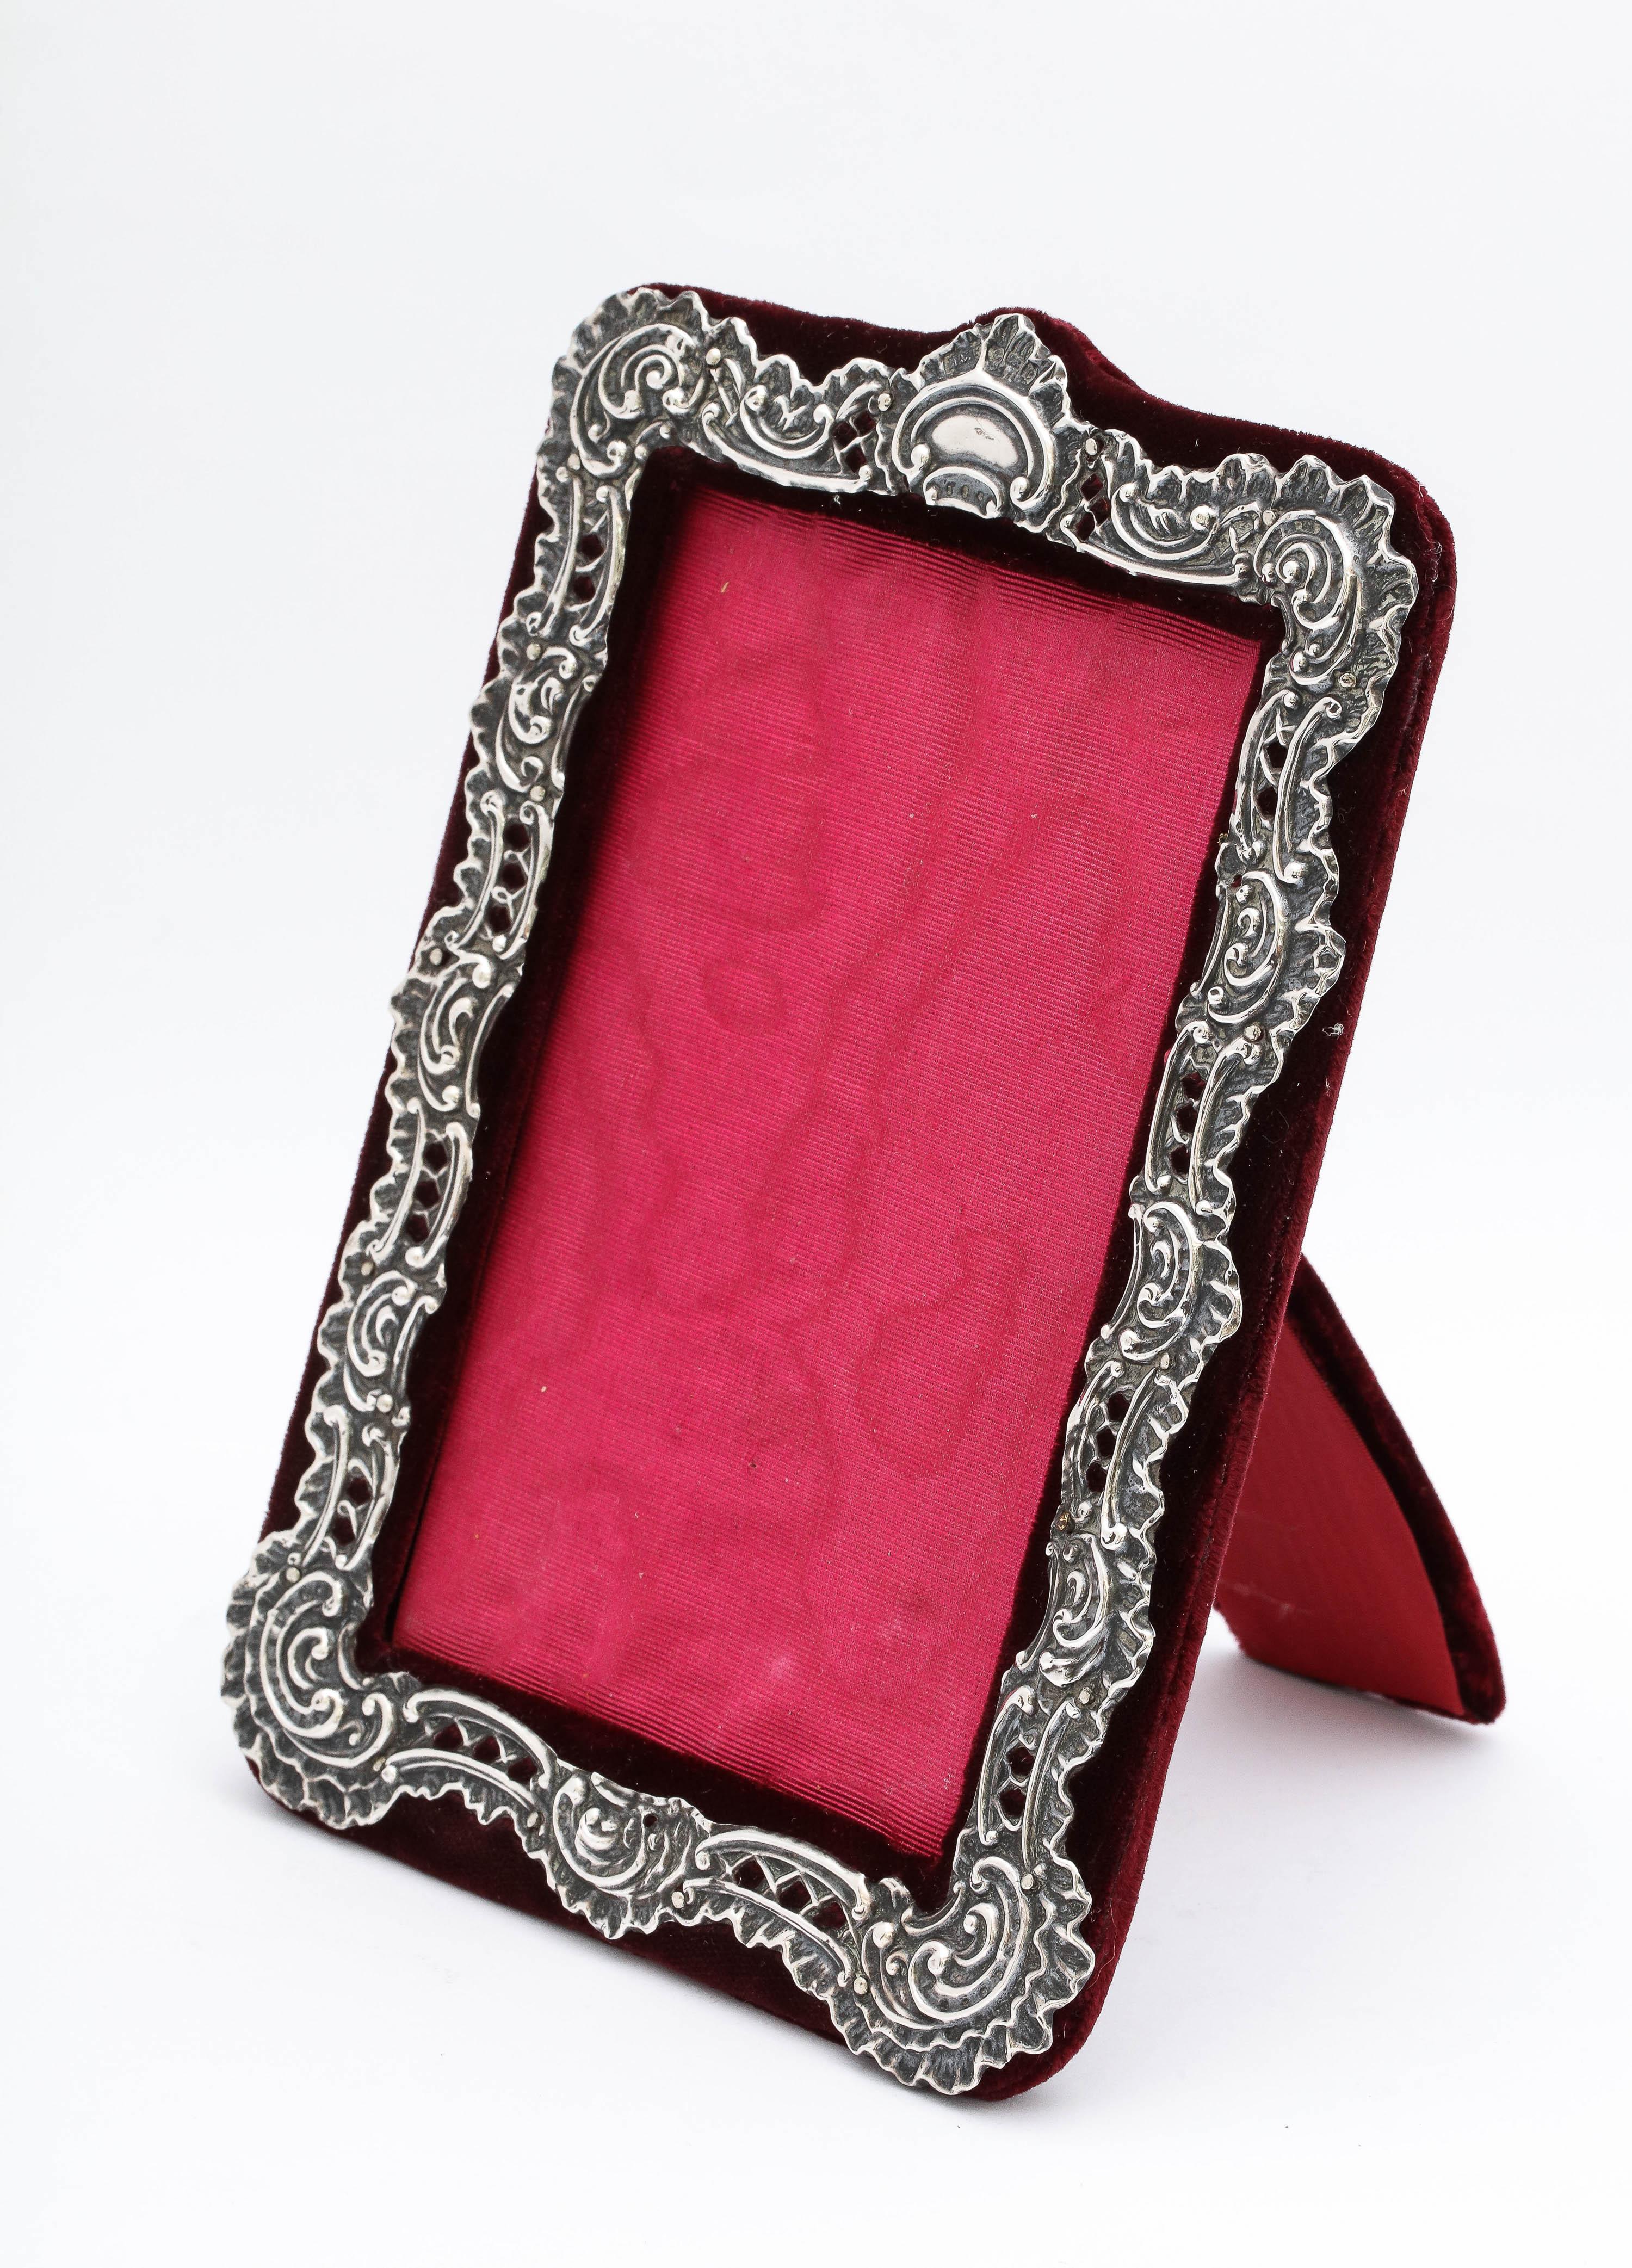 English Edwardian Period Victorian Style Sterling Silver Picture Frame For Sale